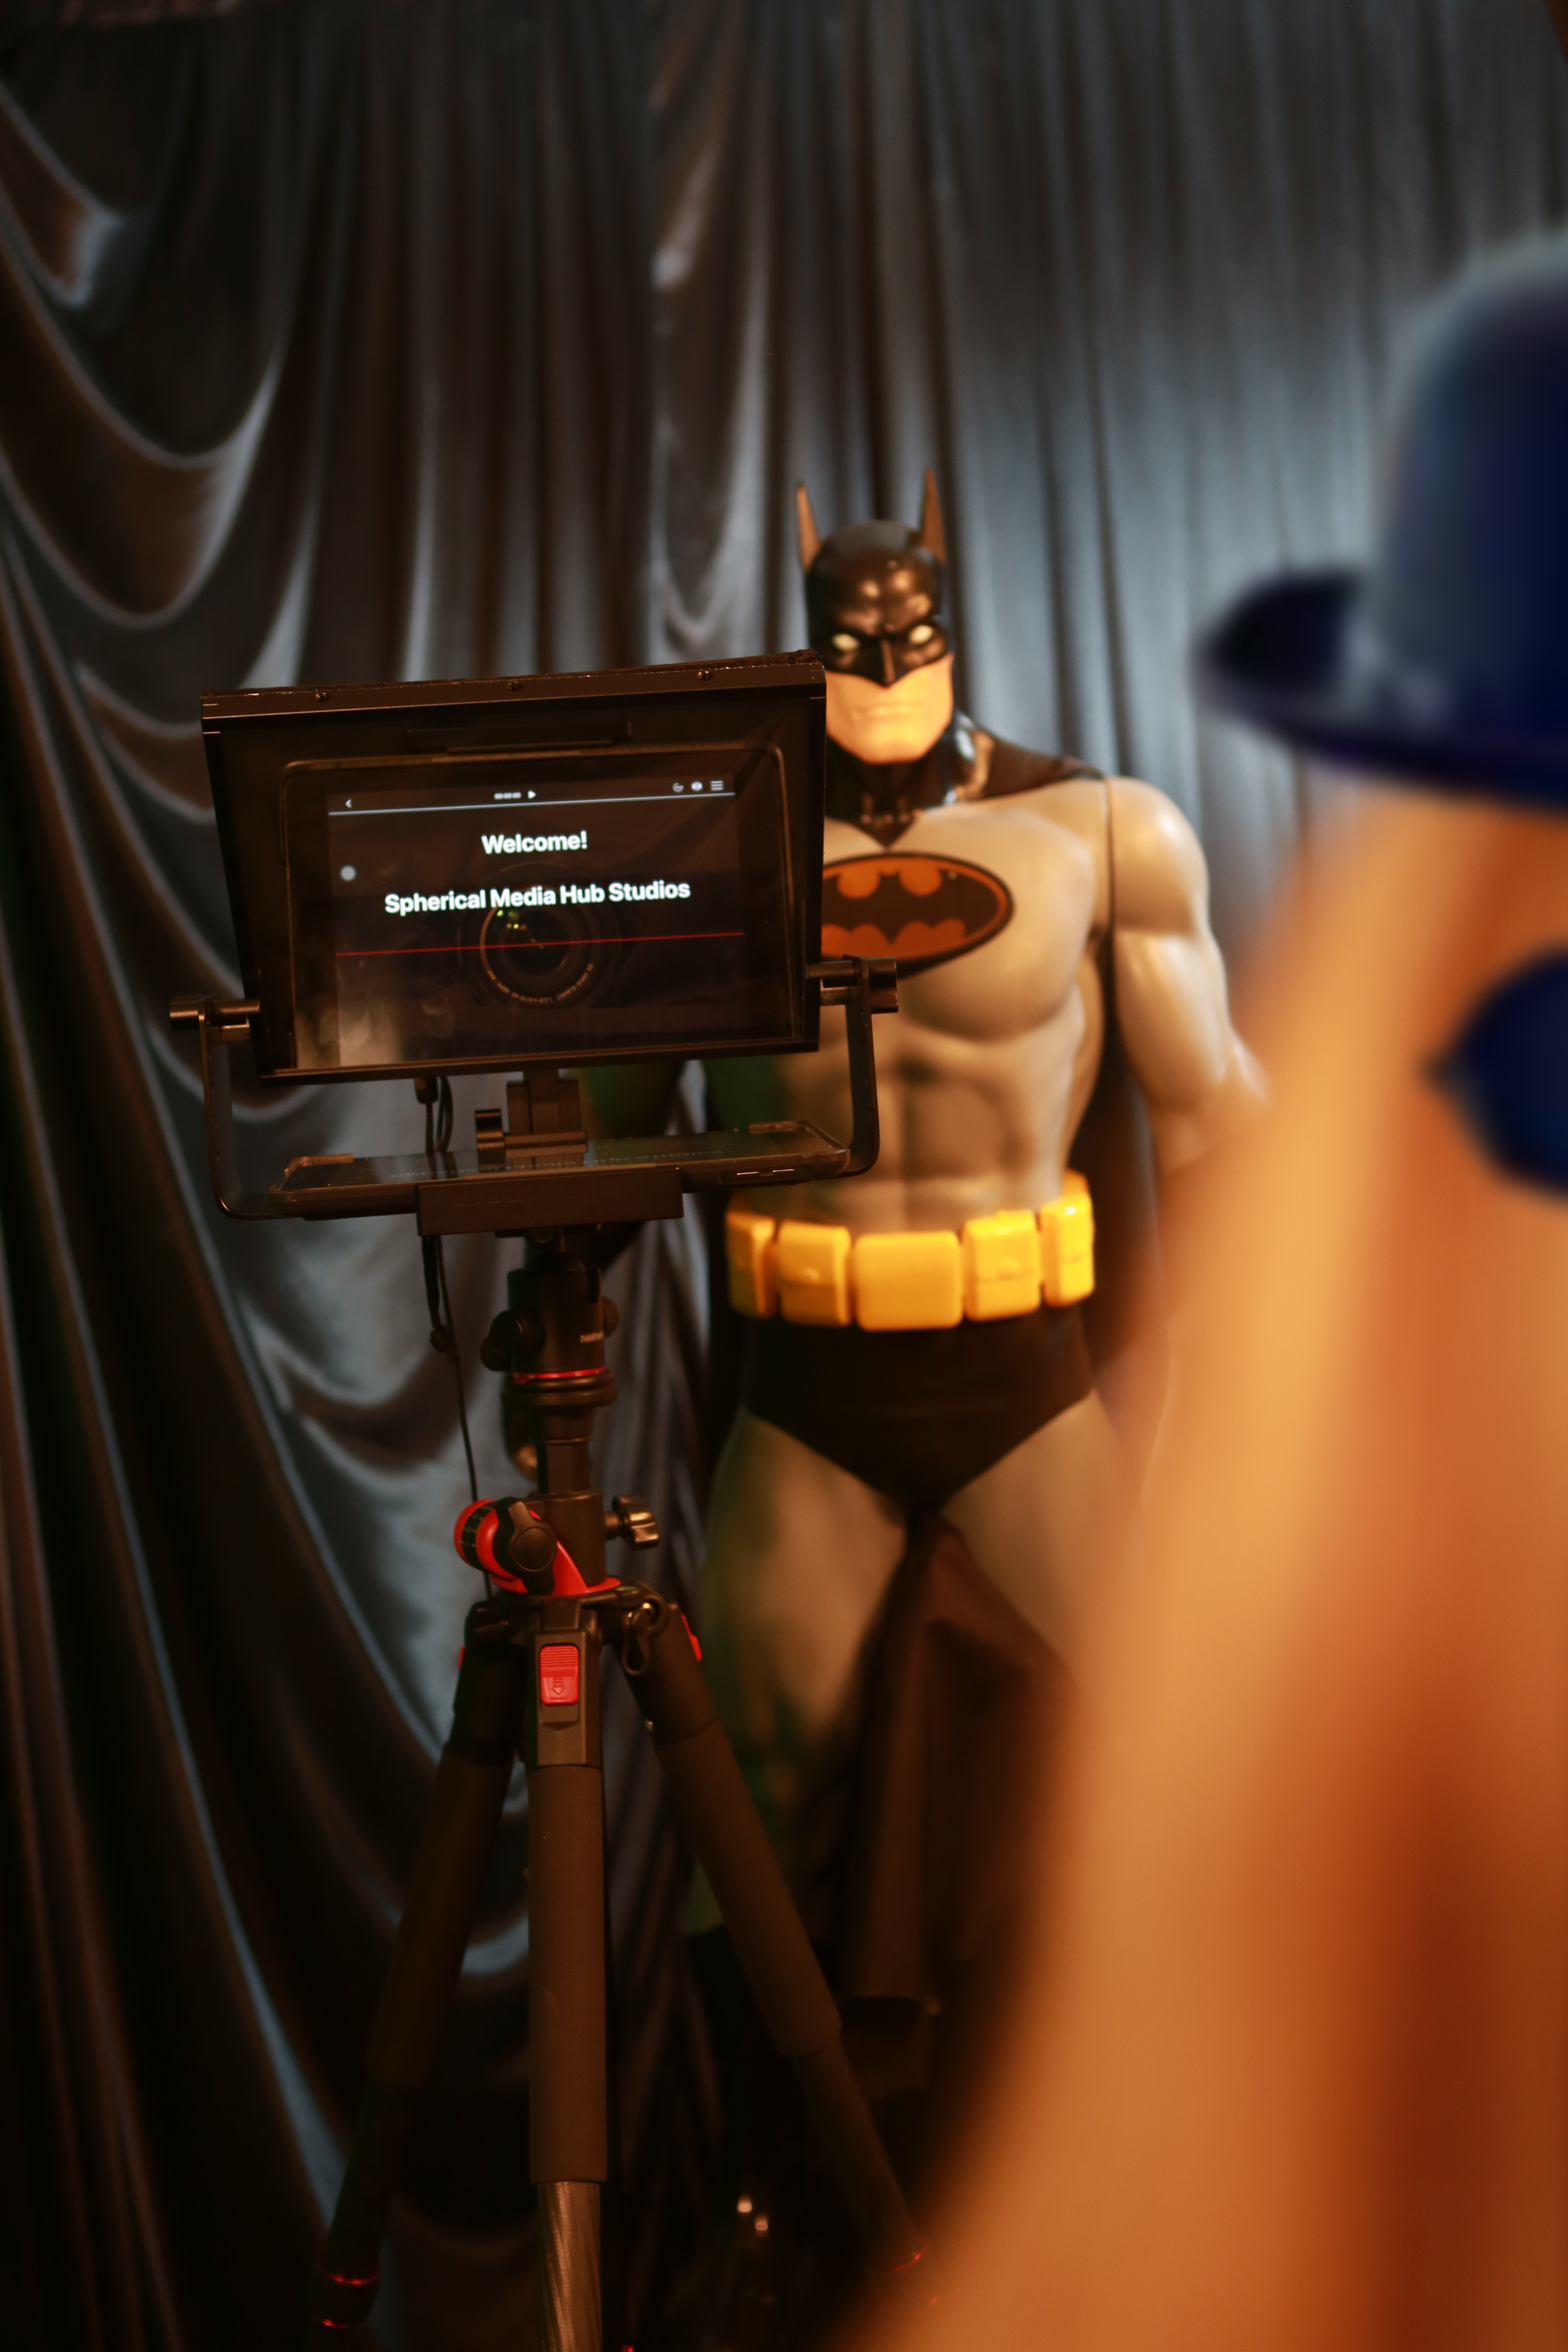 Batman and cousin It using the teleprompter.